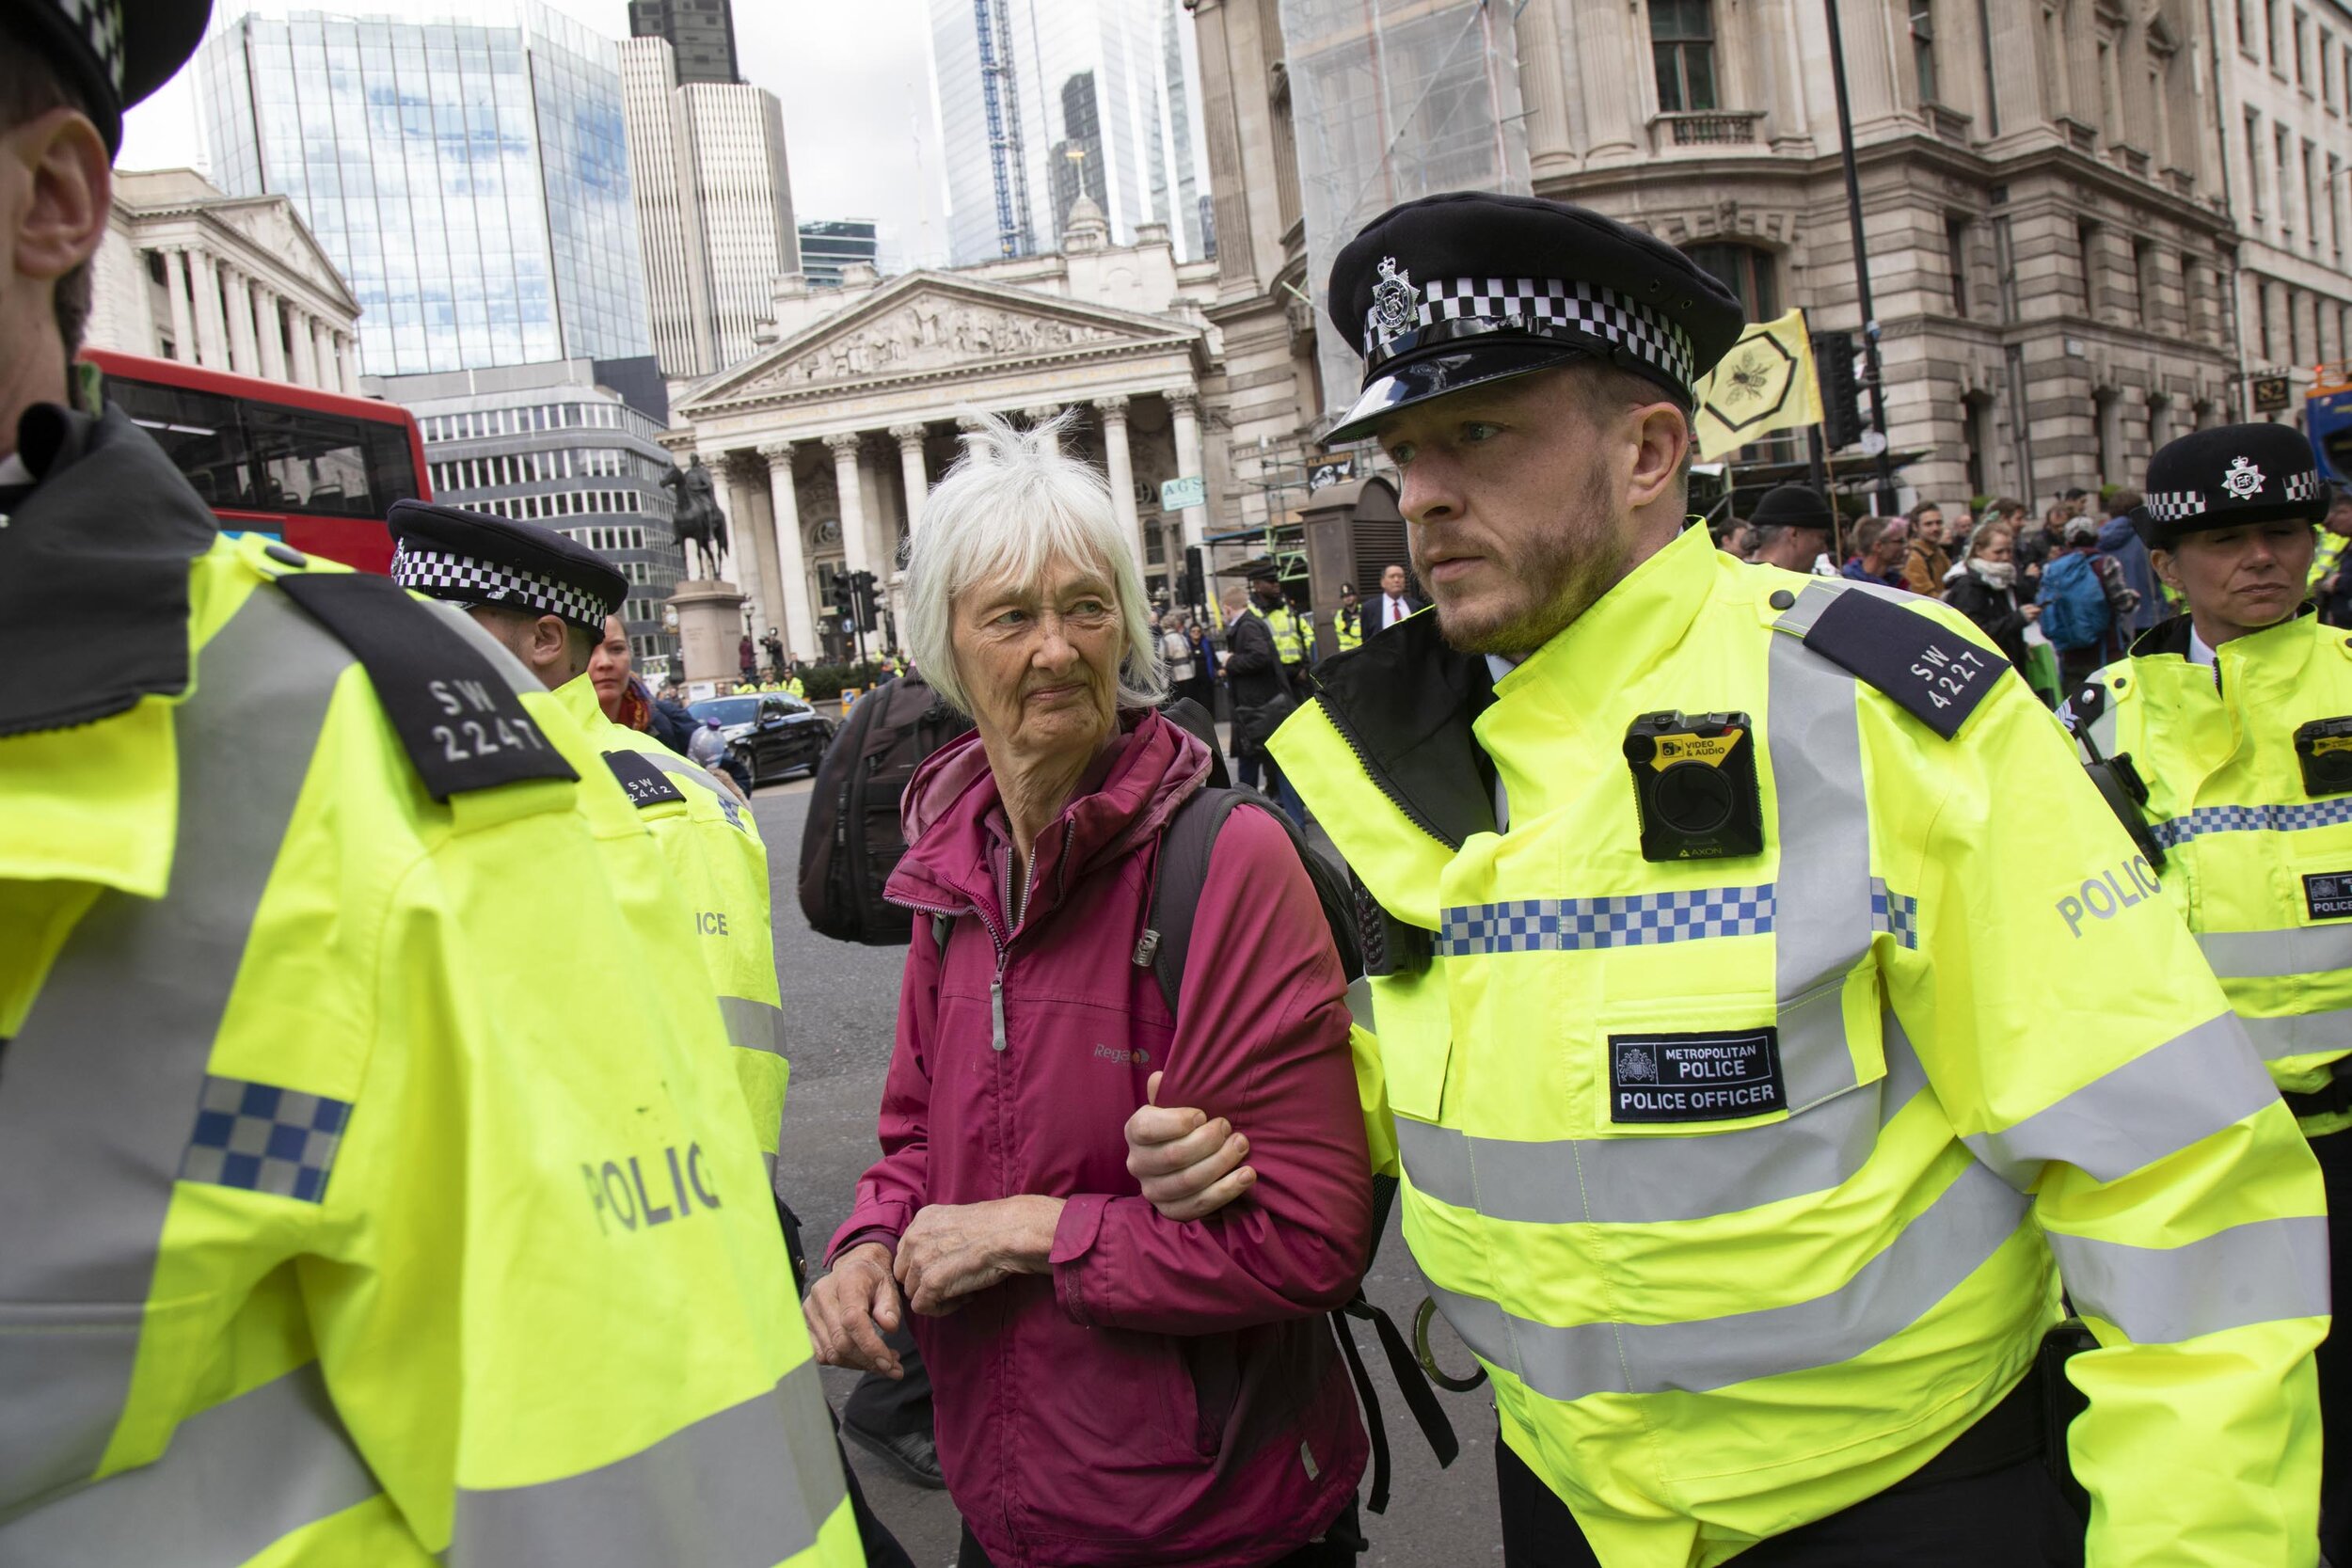  Elderly activist is arrested for blocking the street at Bank in the heart of the City of London in protest that the government is not doing enough to avoid catastrophic climate change. 